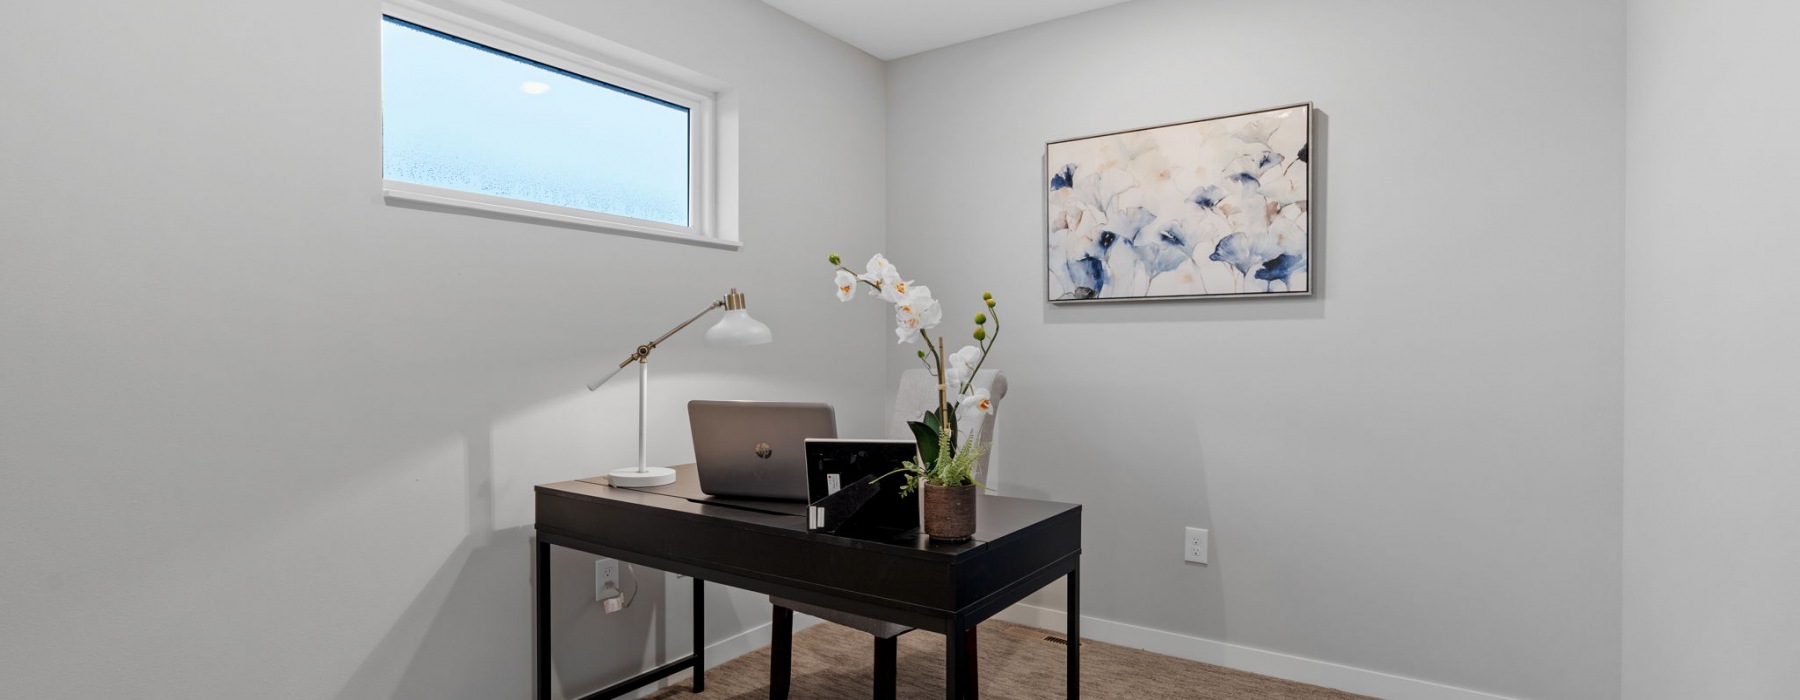 Office space fit for working from home